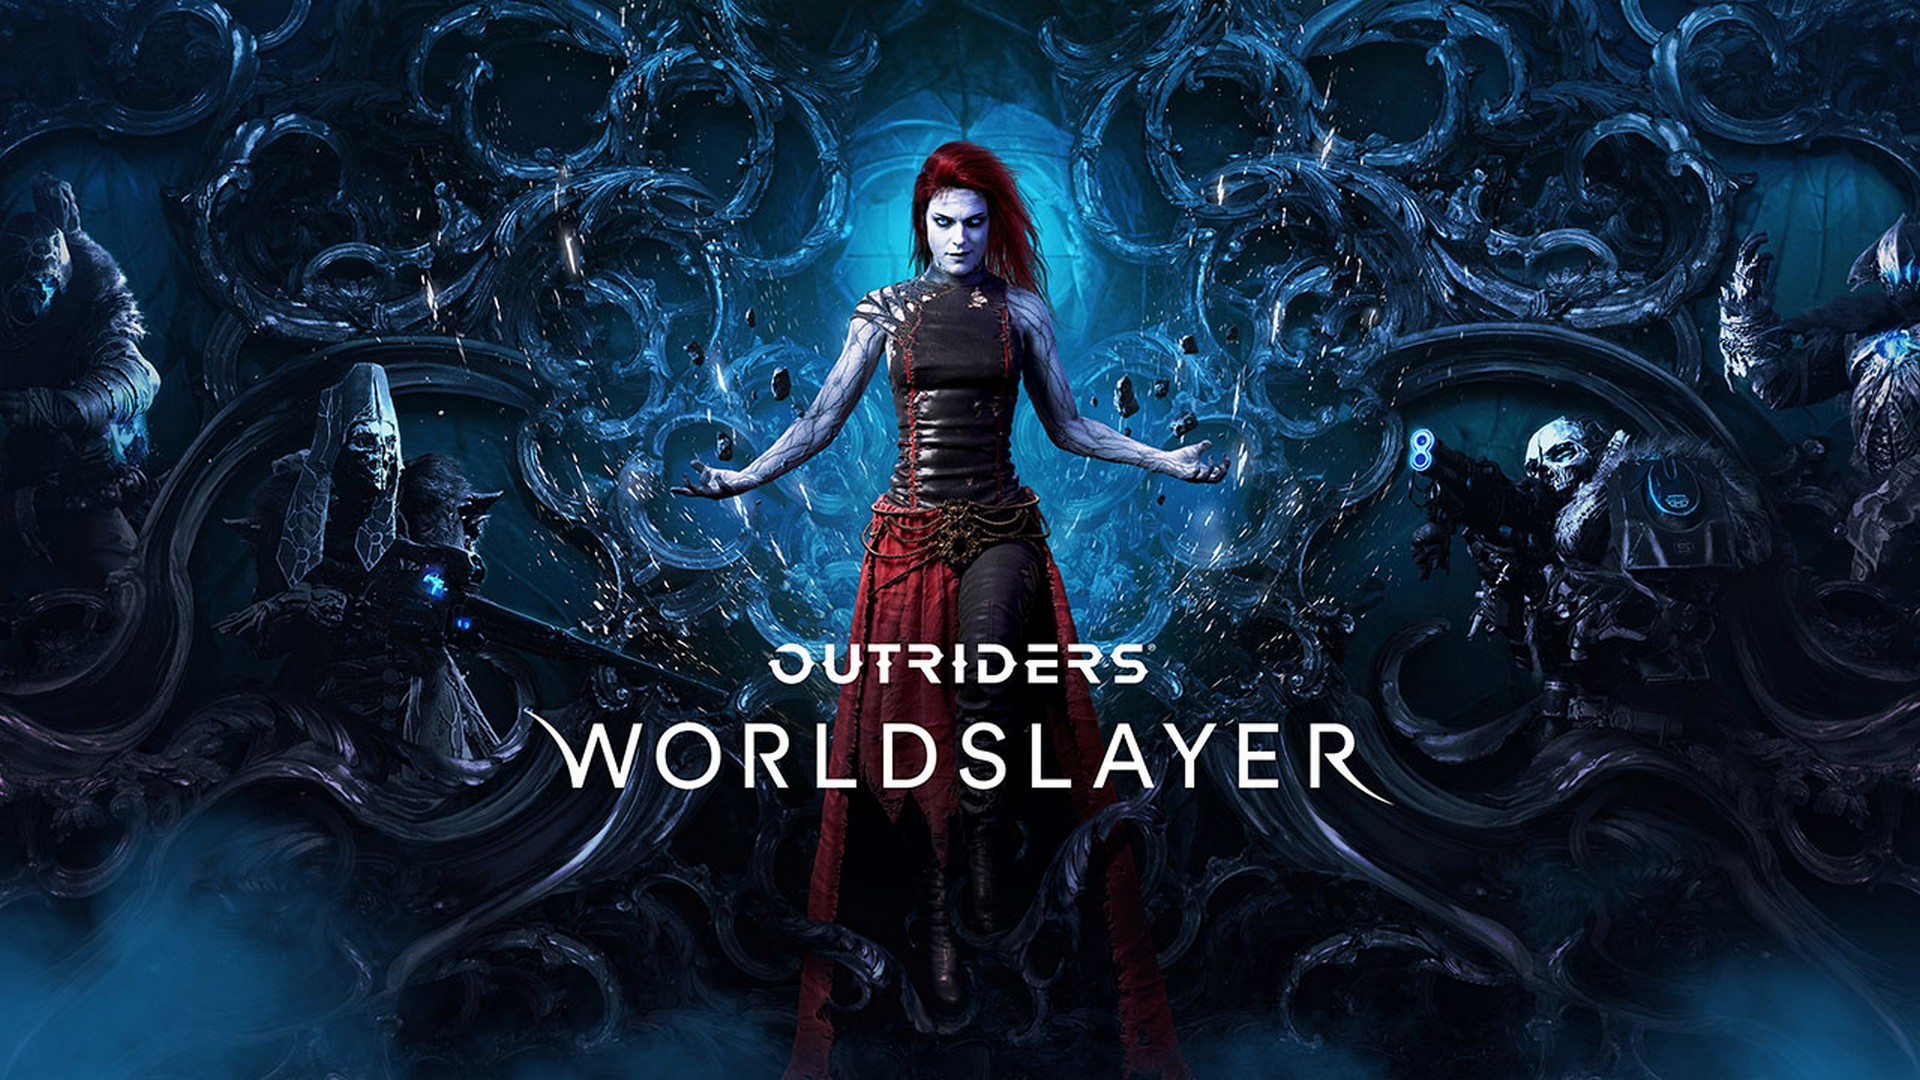 Outriders Worldslayer Is Available Now